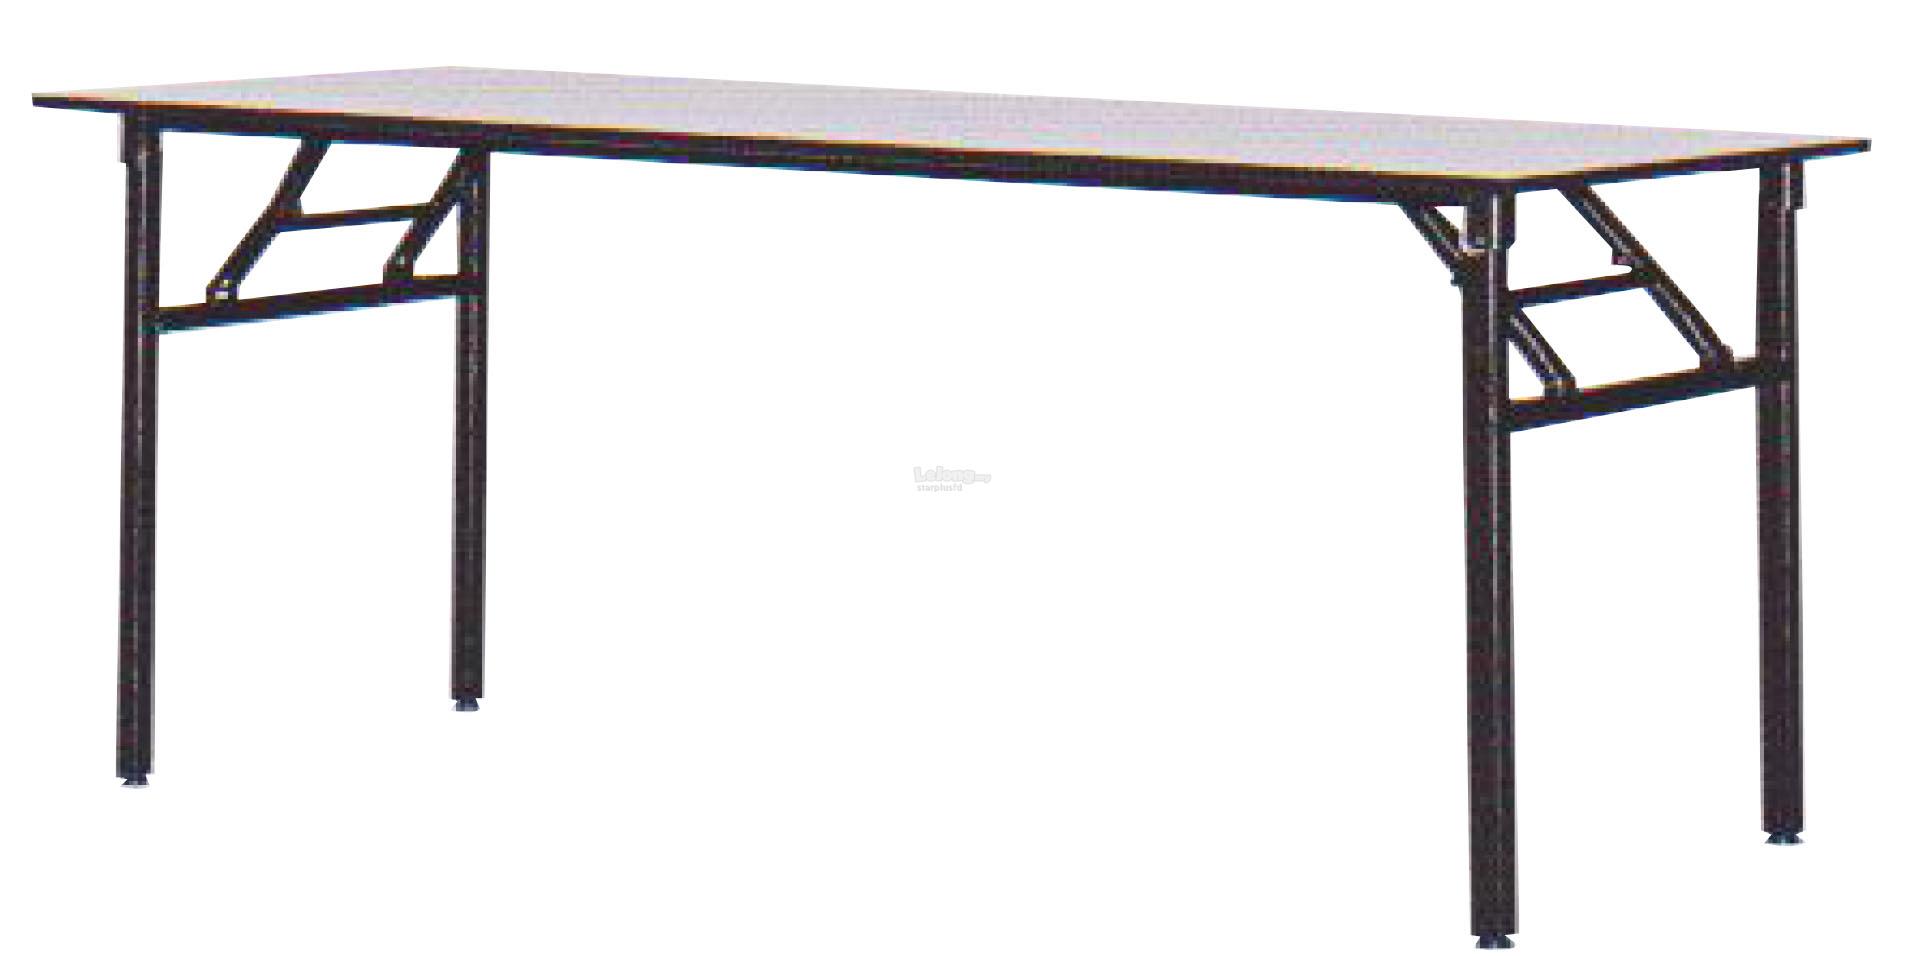 Folding Table / Banquet Table 1200mm(W) x 750mm(D) x 760mm(H)